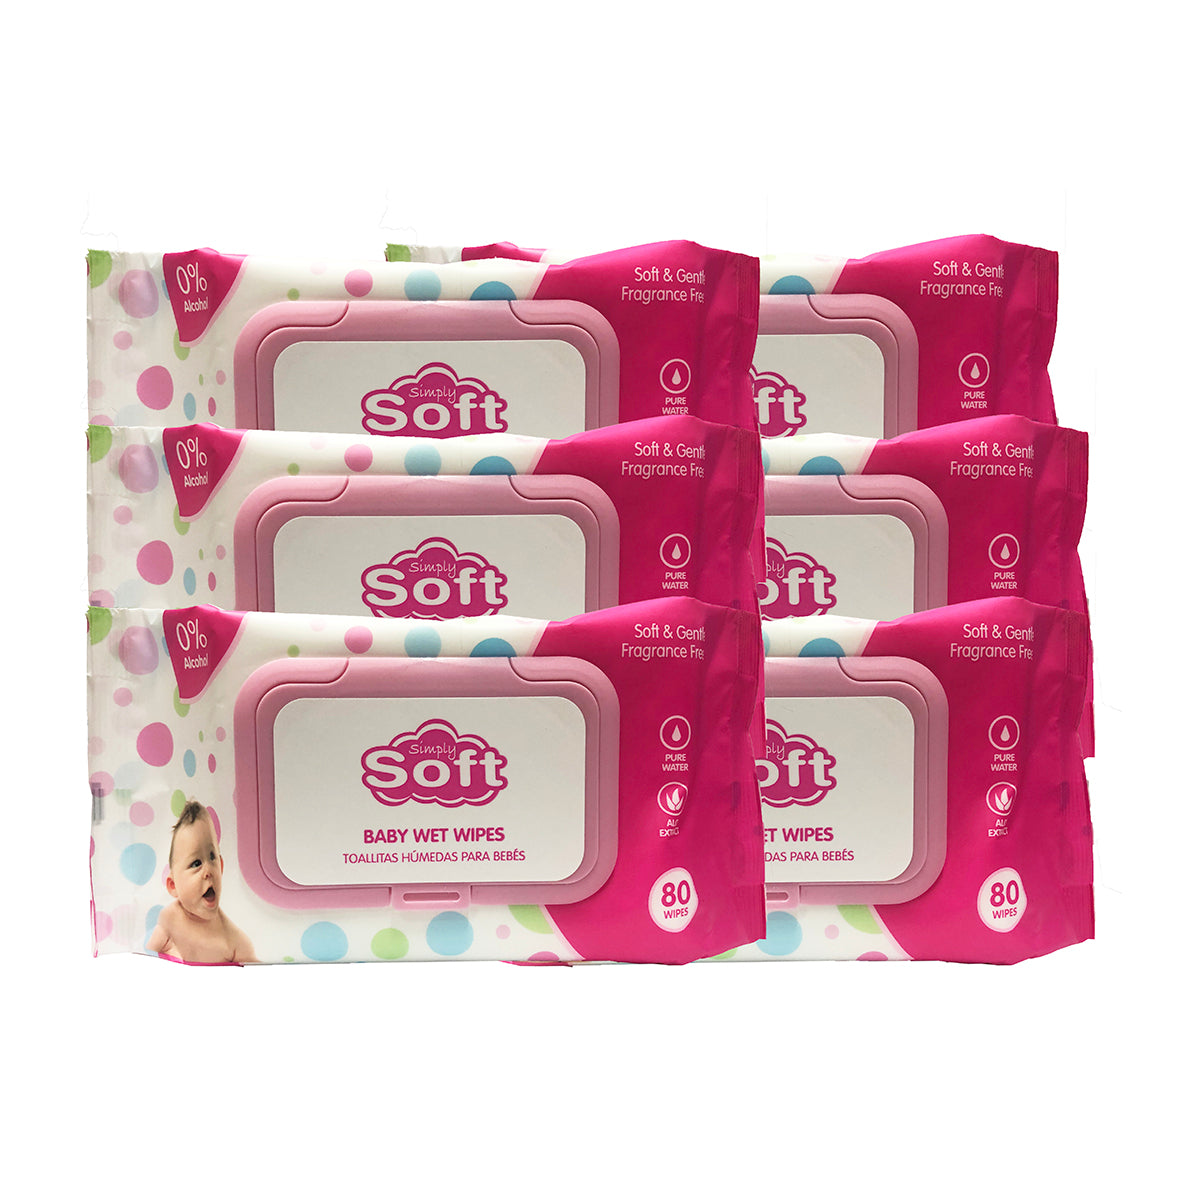 Simply Soft Baby Wet Wipes Soft & Gentle Fragrance Free 80 wipes "6-PACK"